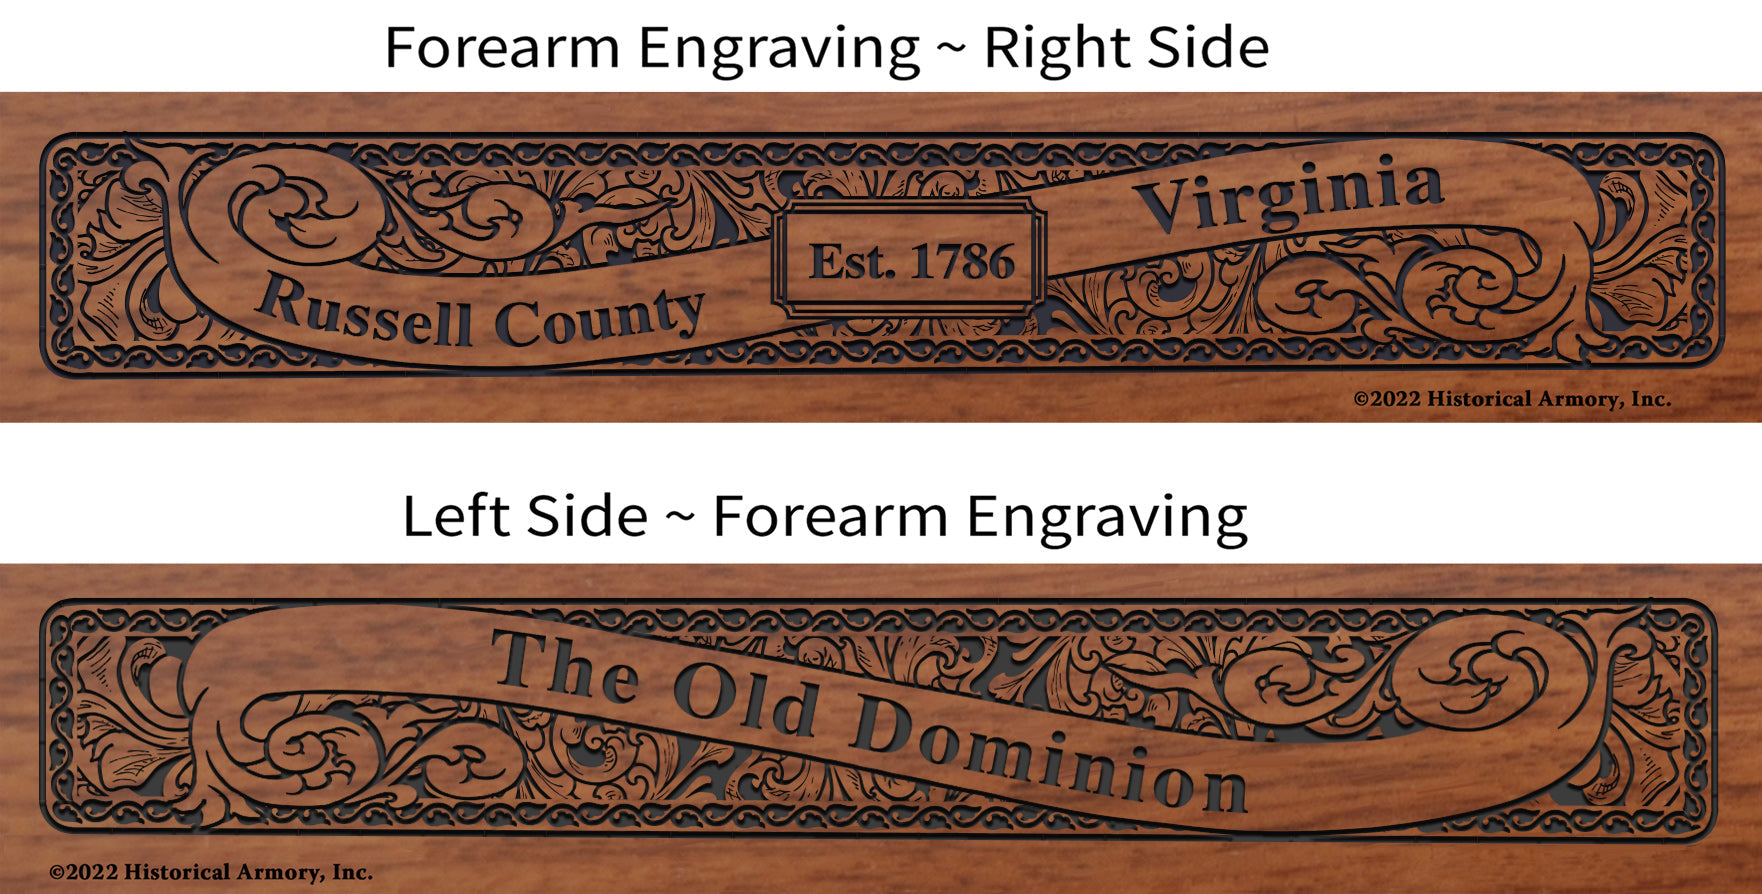 Russell County Virginia Engraved Rifle Forearm